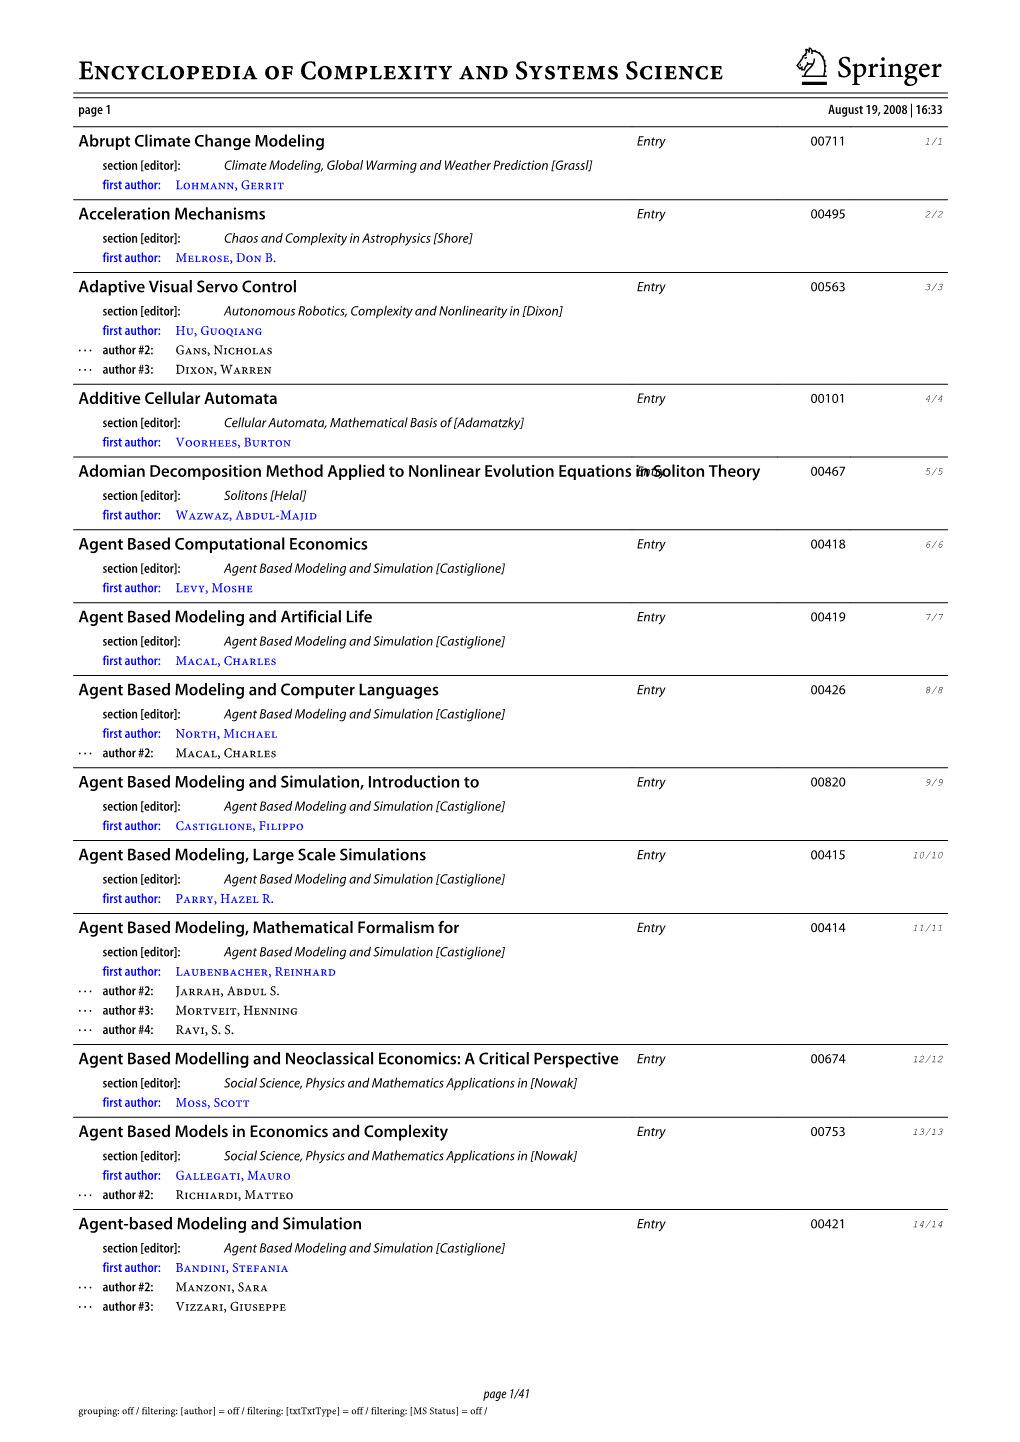 Encyclopedia of Complexity and Systems Science 123 Page 1 August 19, 2008 | 16:33